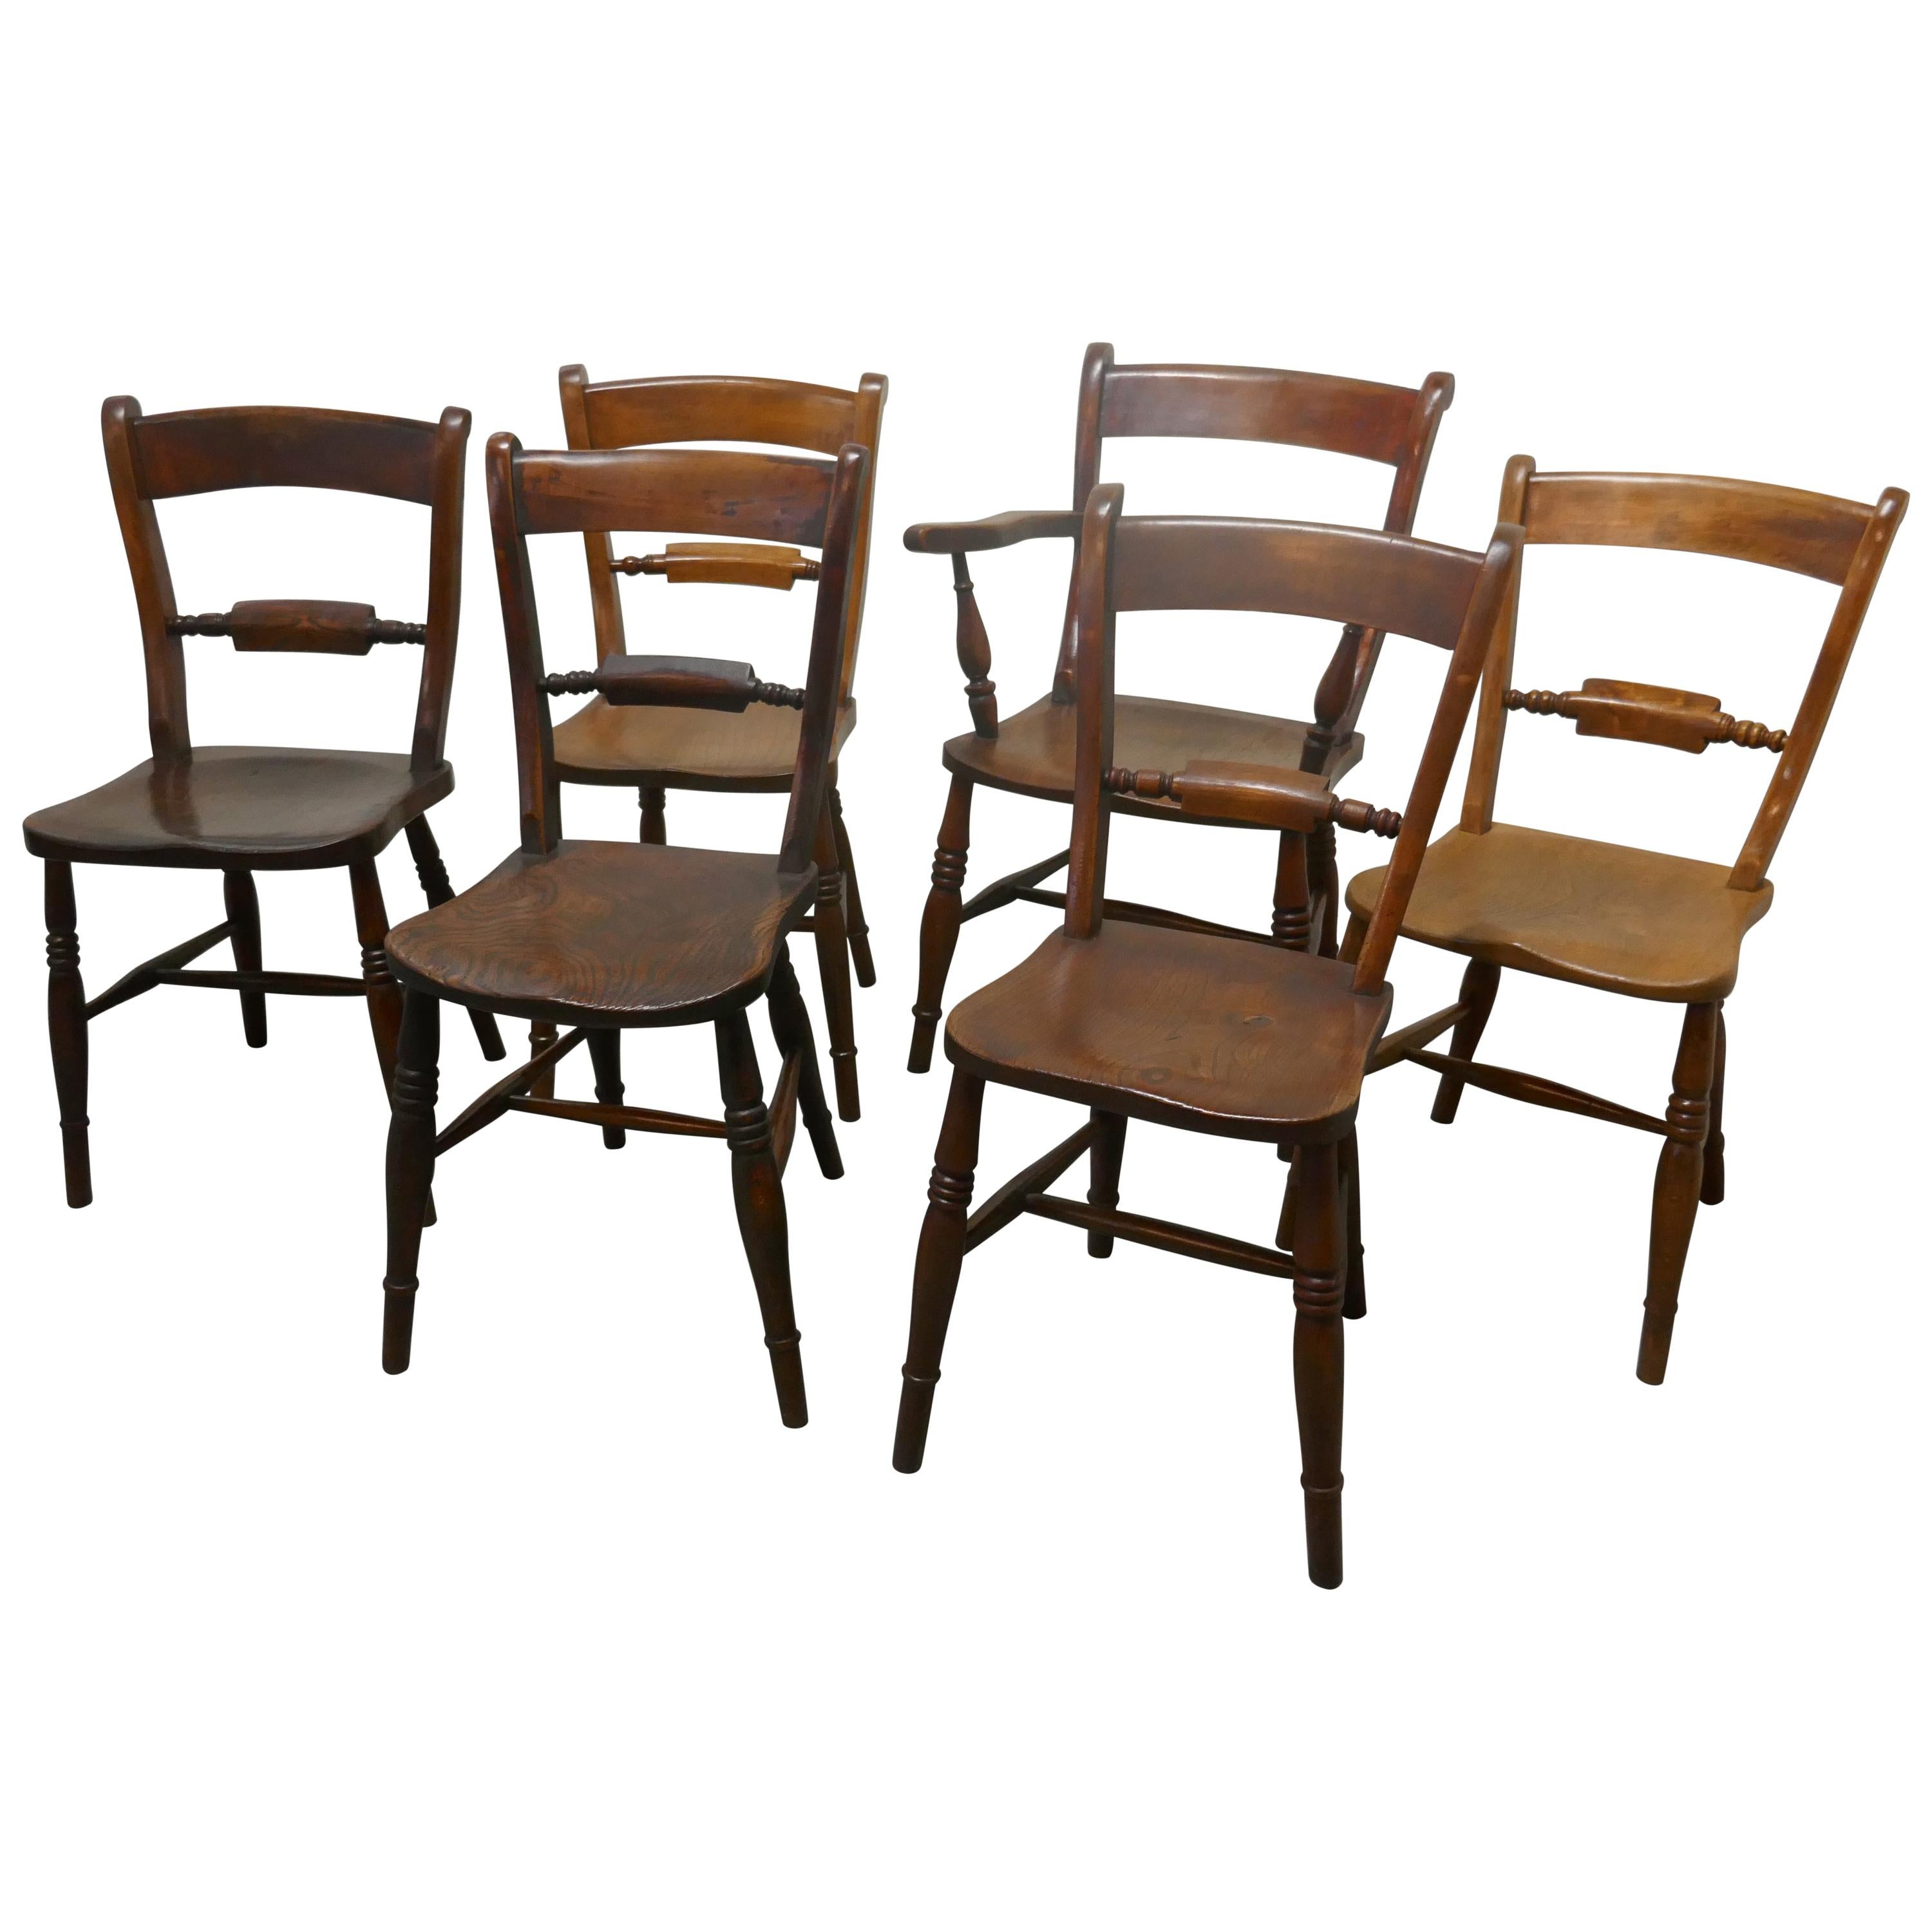 Harlequin Set of 6 Victorian Beech and Elm Rope Back Kitchen Chairs